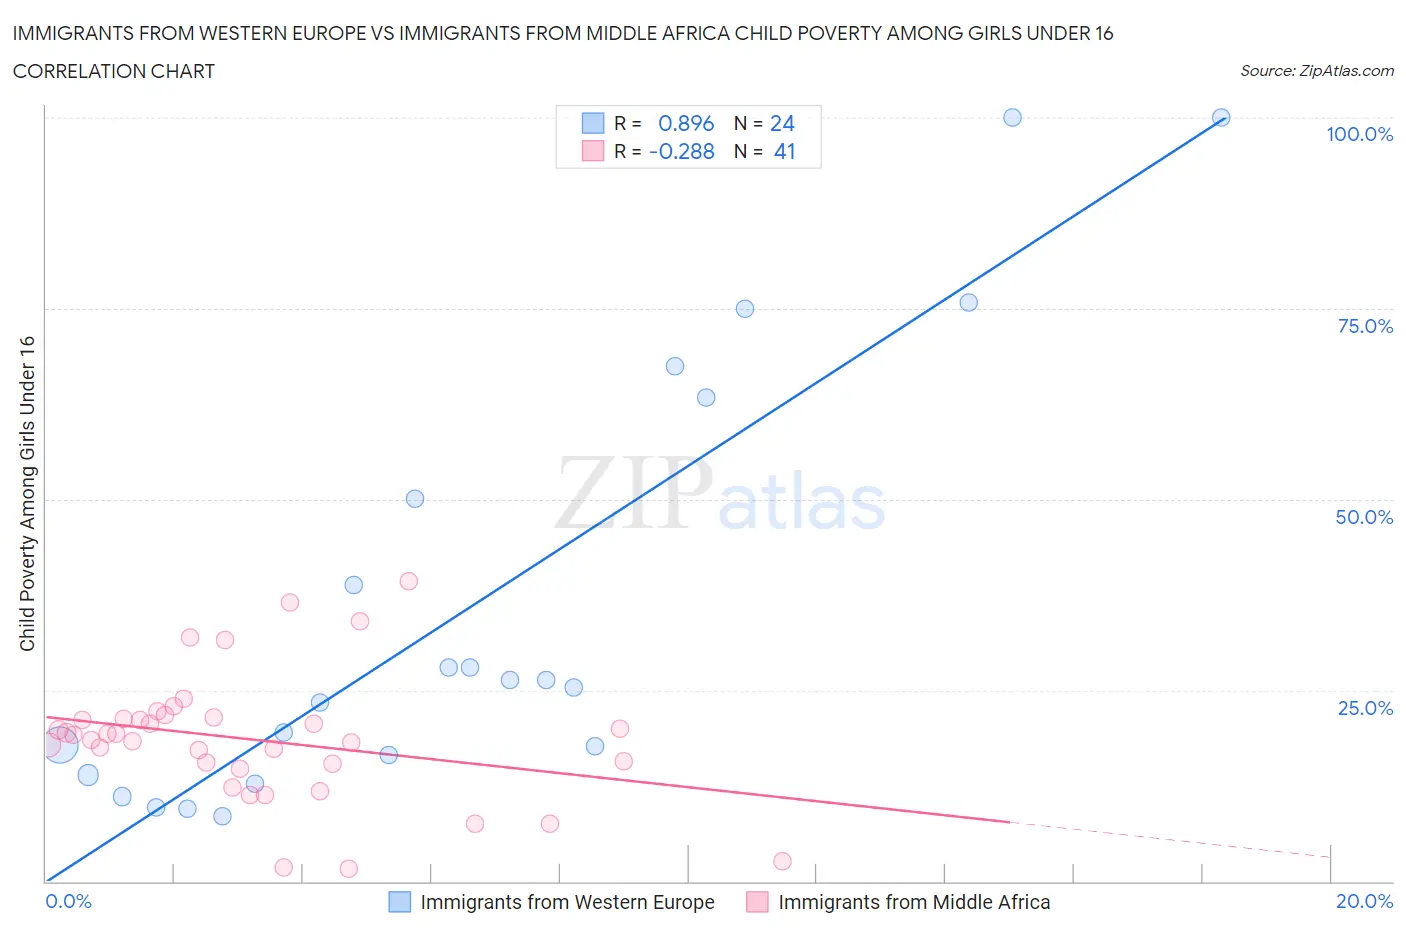 Immigrants from Western Europe vs Immigrants from Middle Africa Child Poverty Among Girls Under 16